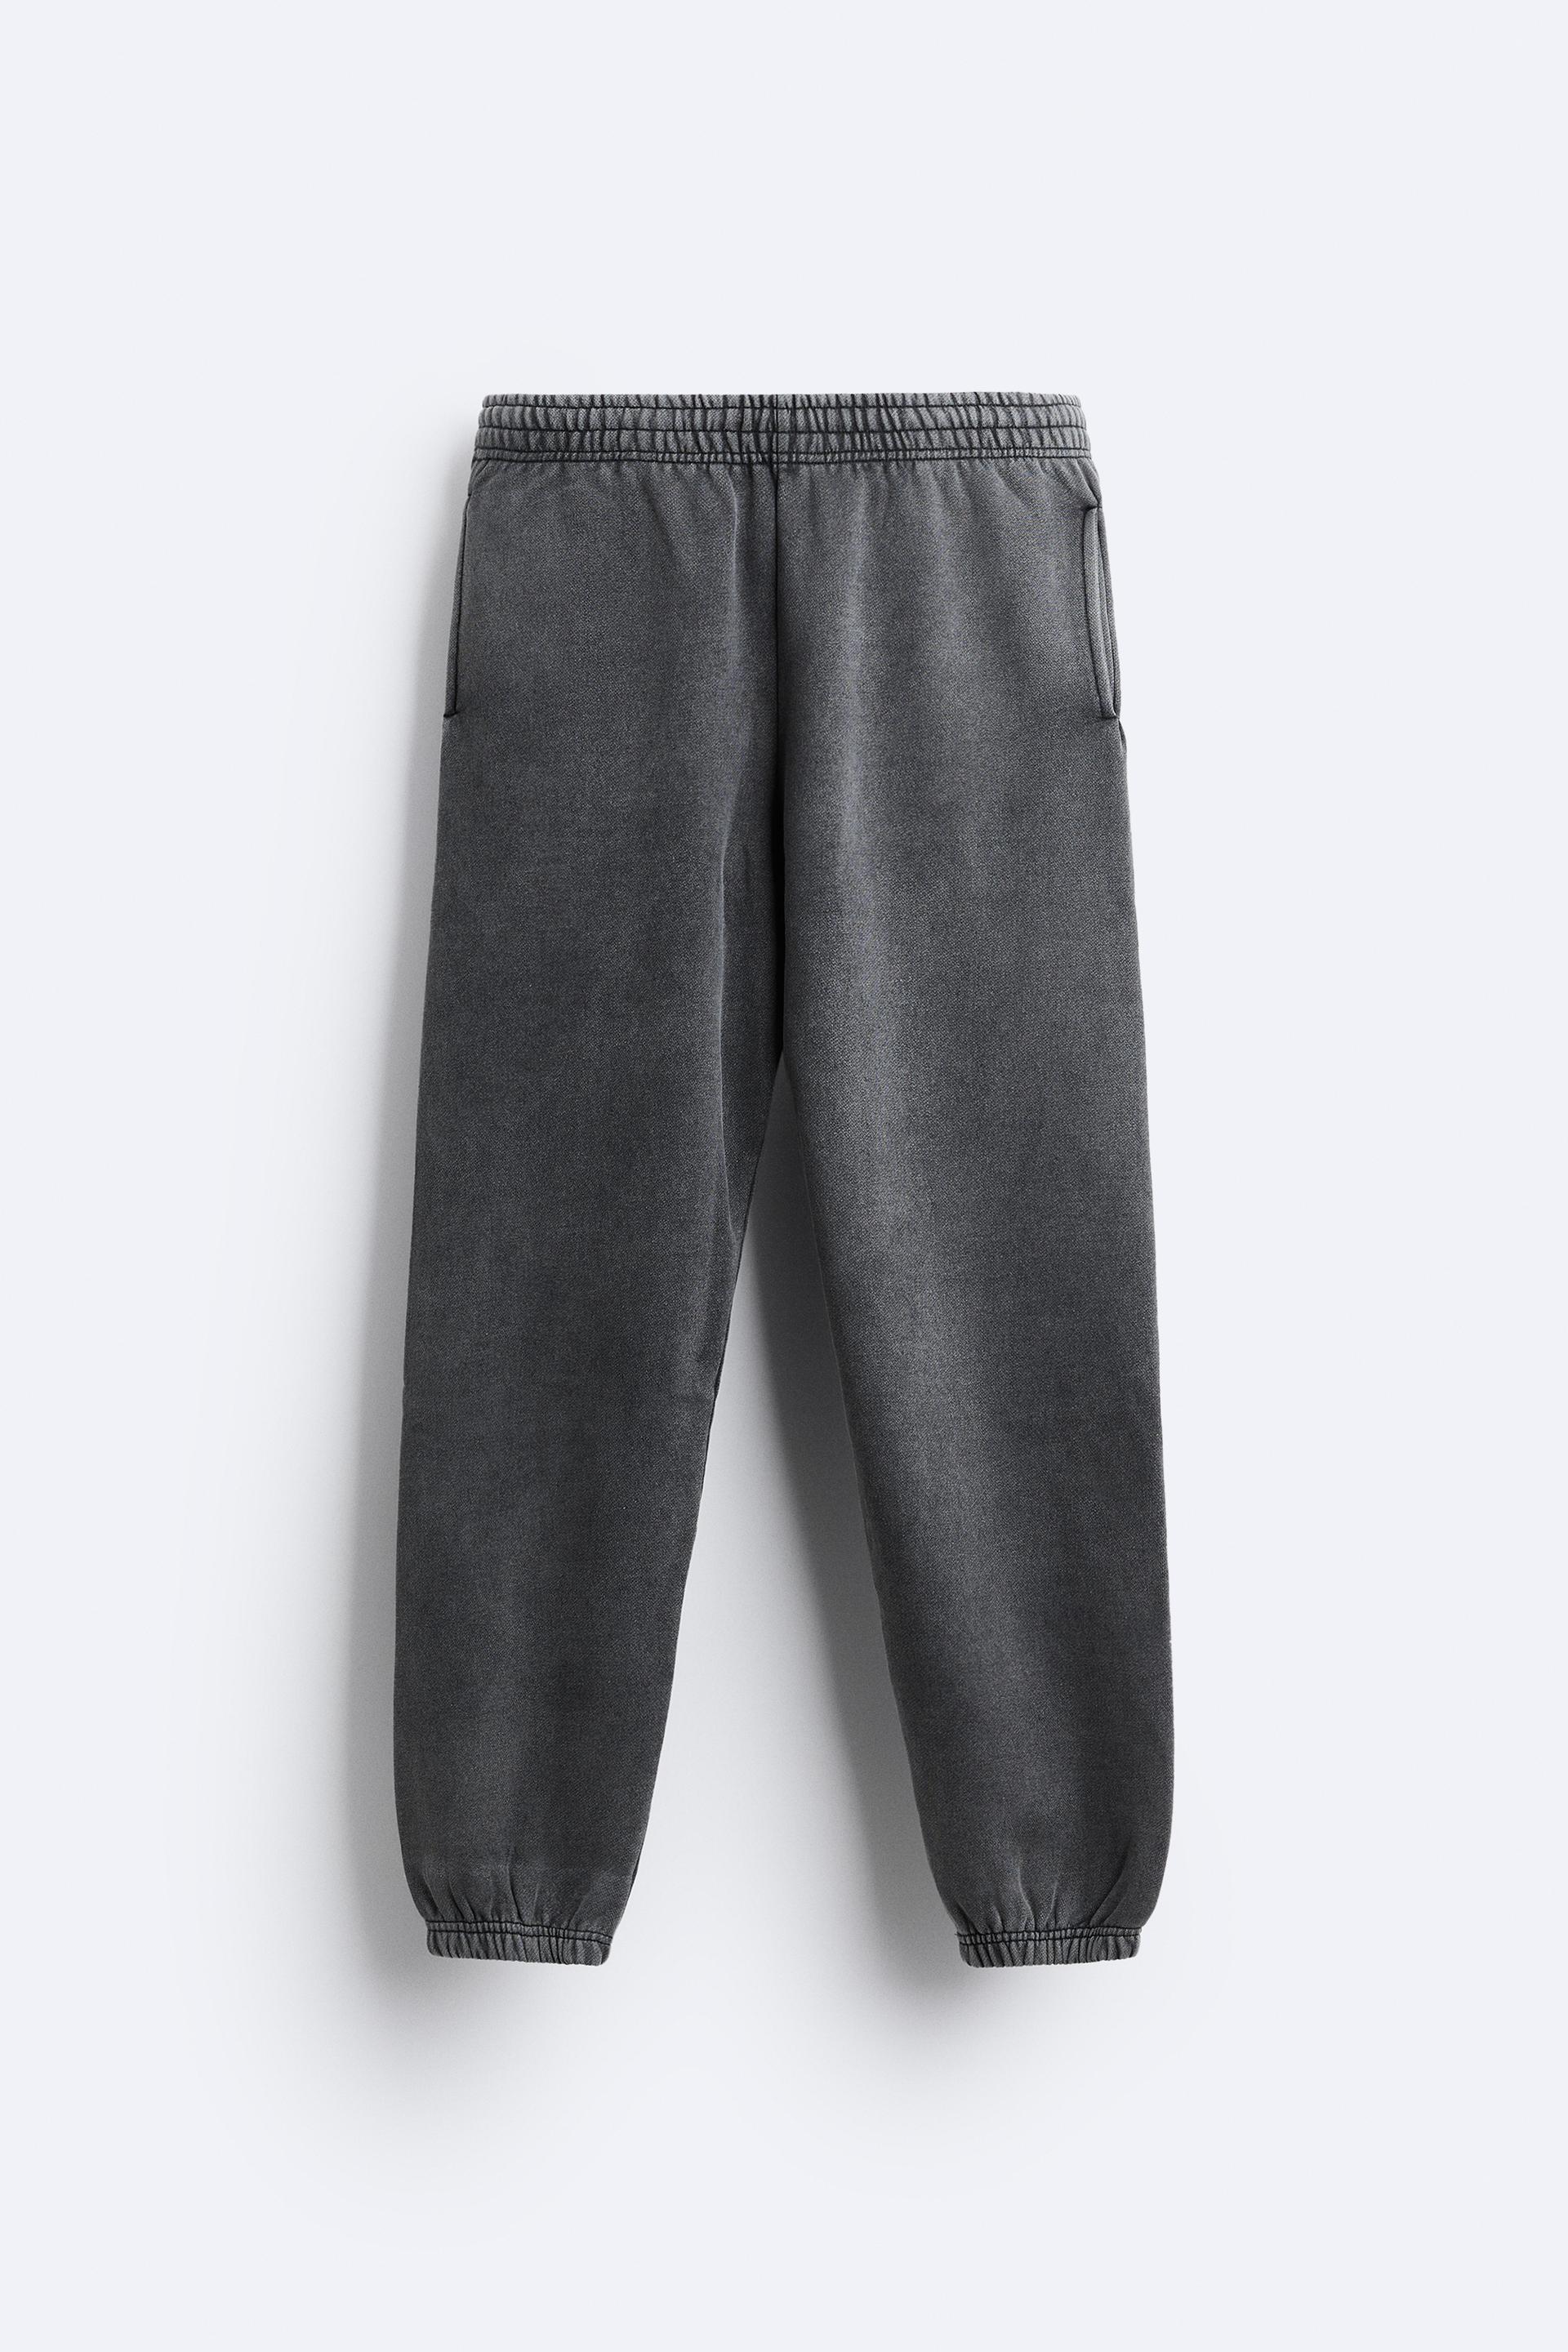 WASHED JOGGER PANTS - Anthracite grey